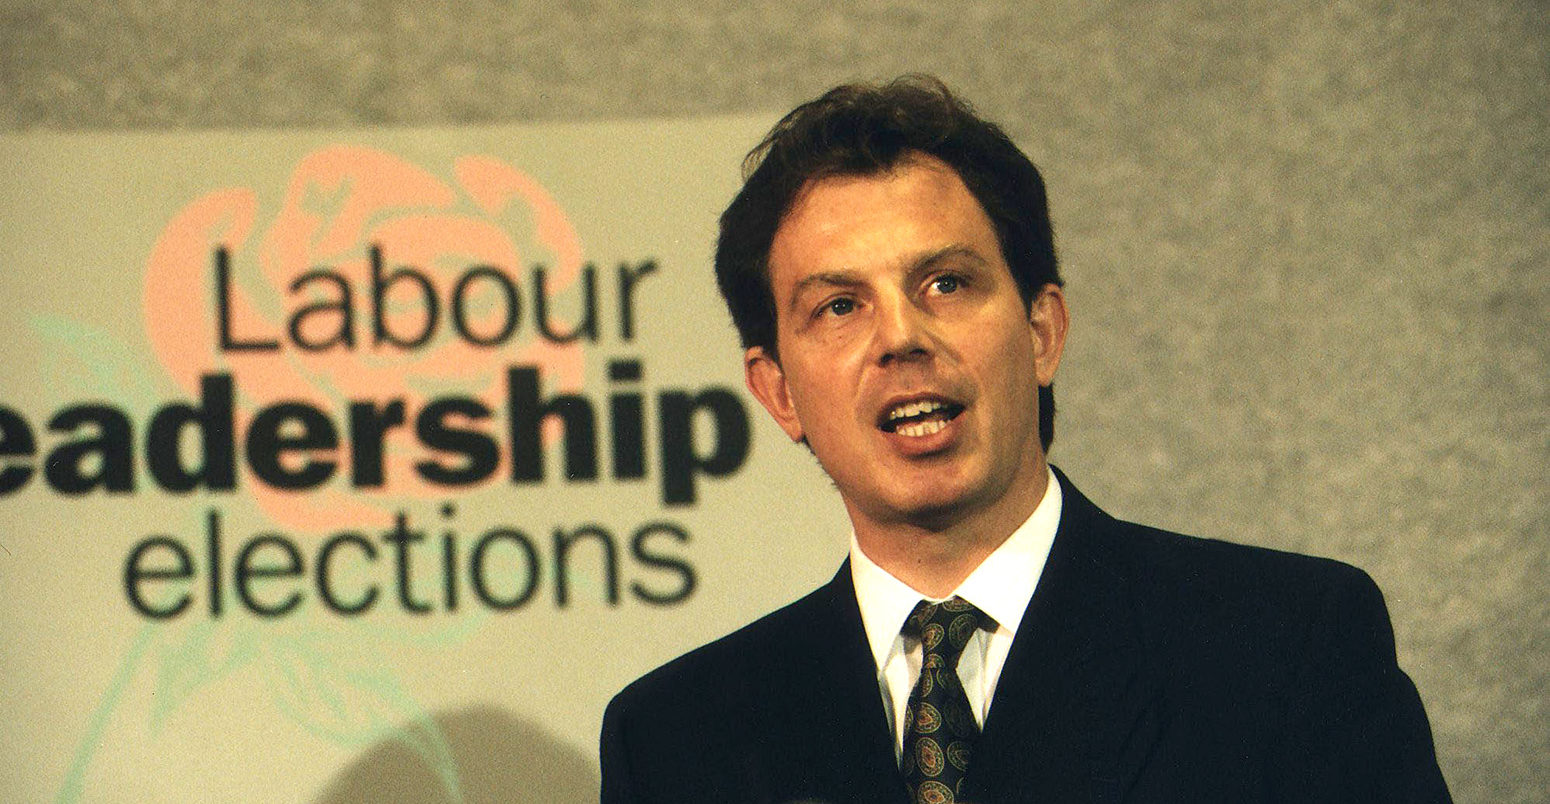 Tony Blair speaking at Labour leadership elections in 1994, Credit: Trinity Mirror / Mirrorpix / Alamy Stock Photo. B449HY